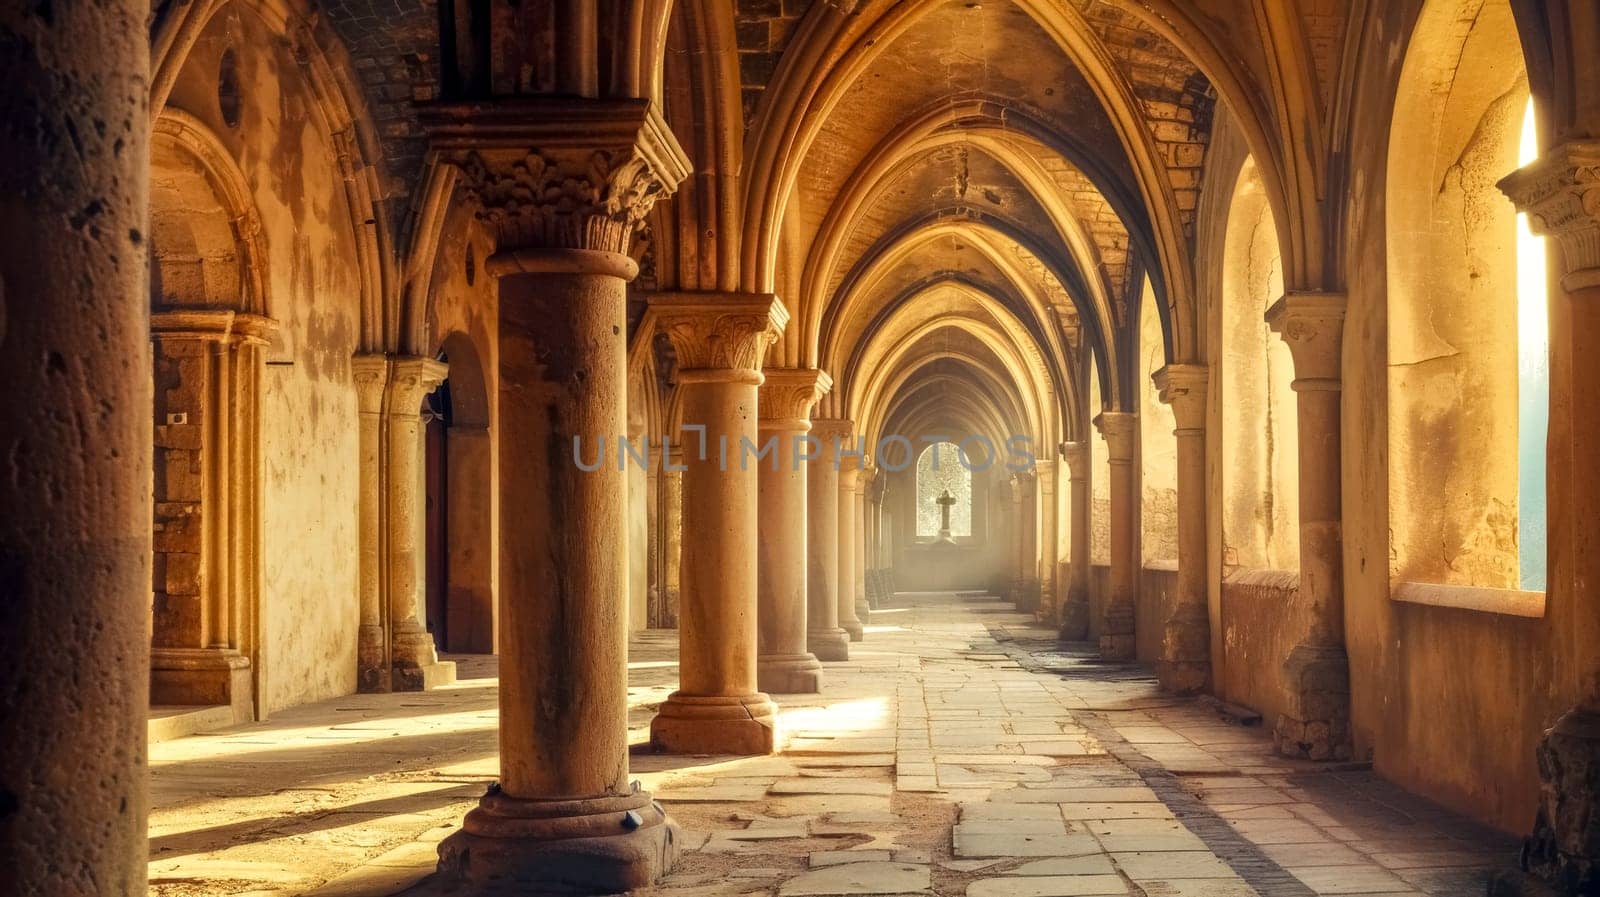 Warm sunlight filters through an old monastery's arched hallway by Edophoto